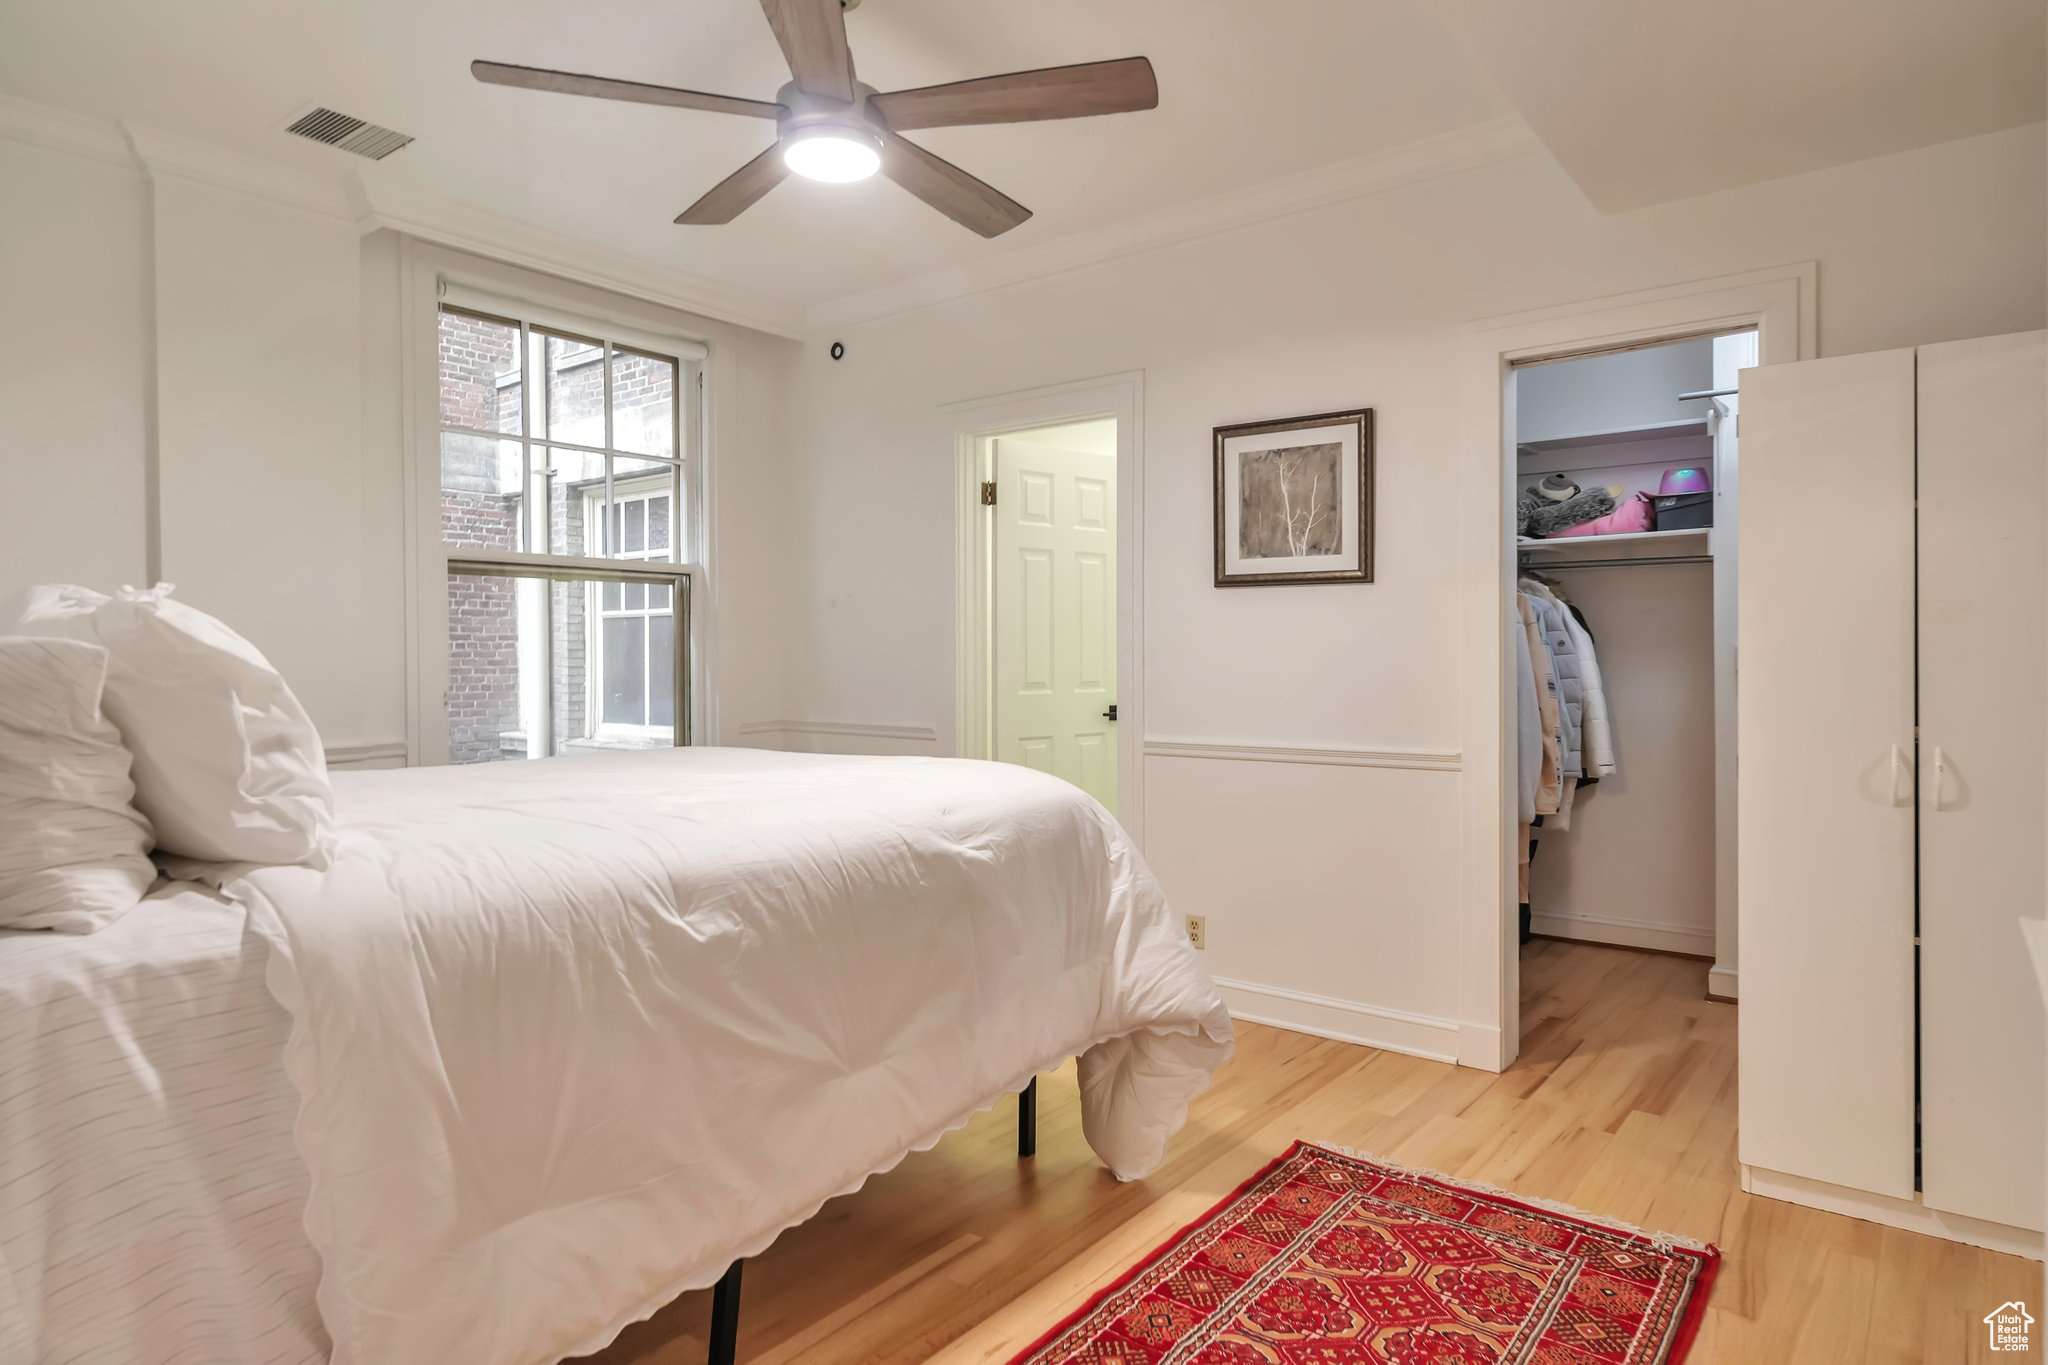 Bedroom featuring ornamental molding, a closet, light wood-type flooring, a walk in closet, and ceiling fan